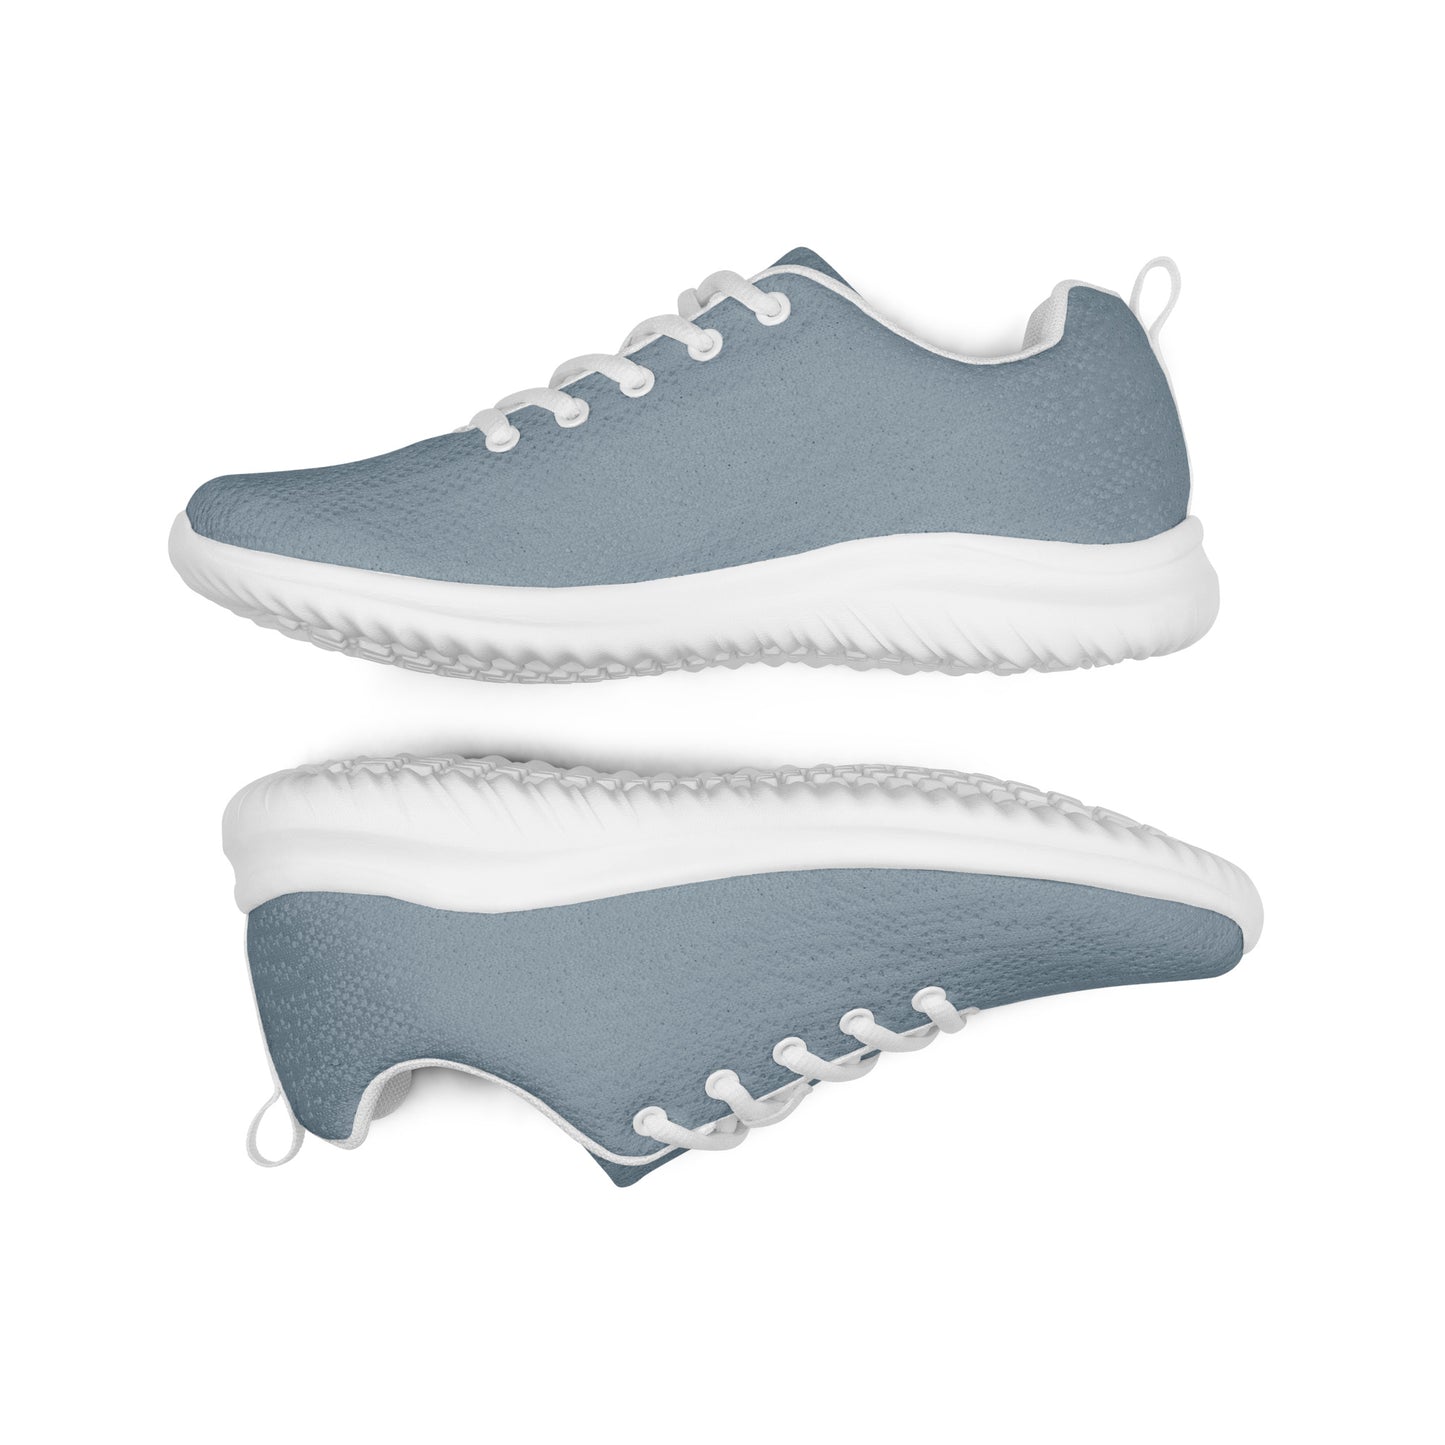 Snooty Fox Art Women’s Athletic Shoes - Summer Song